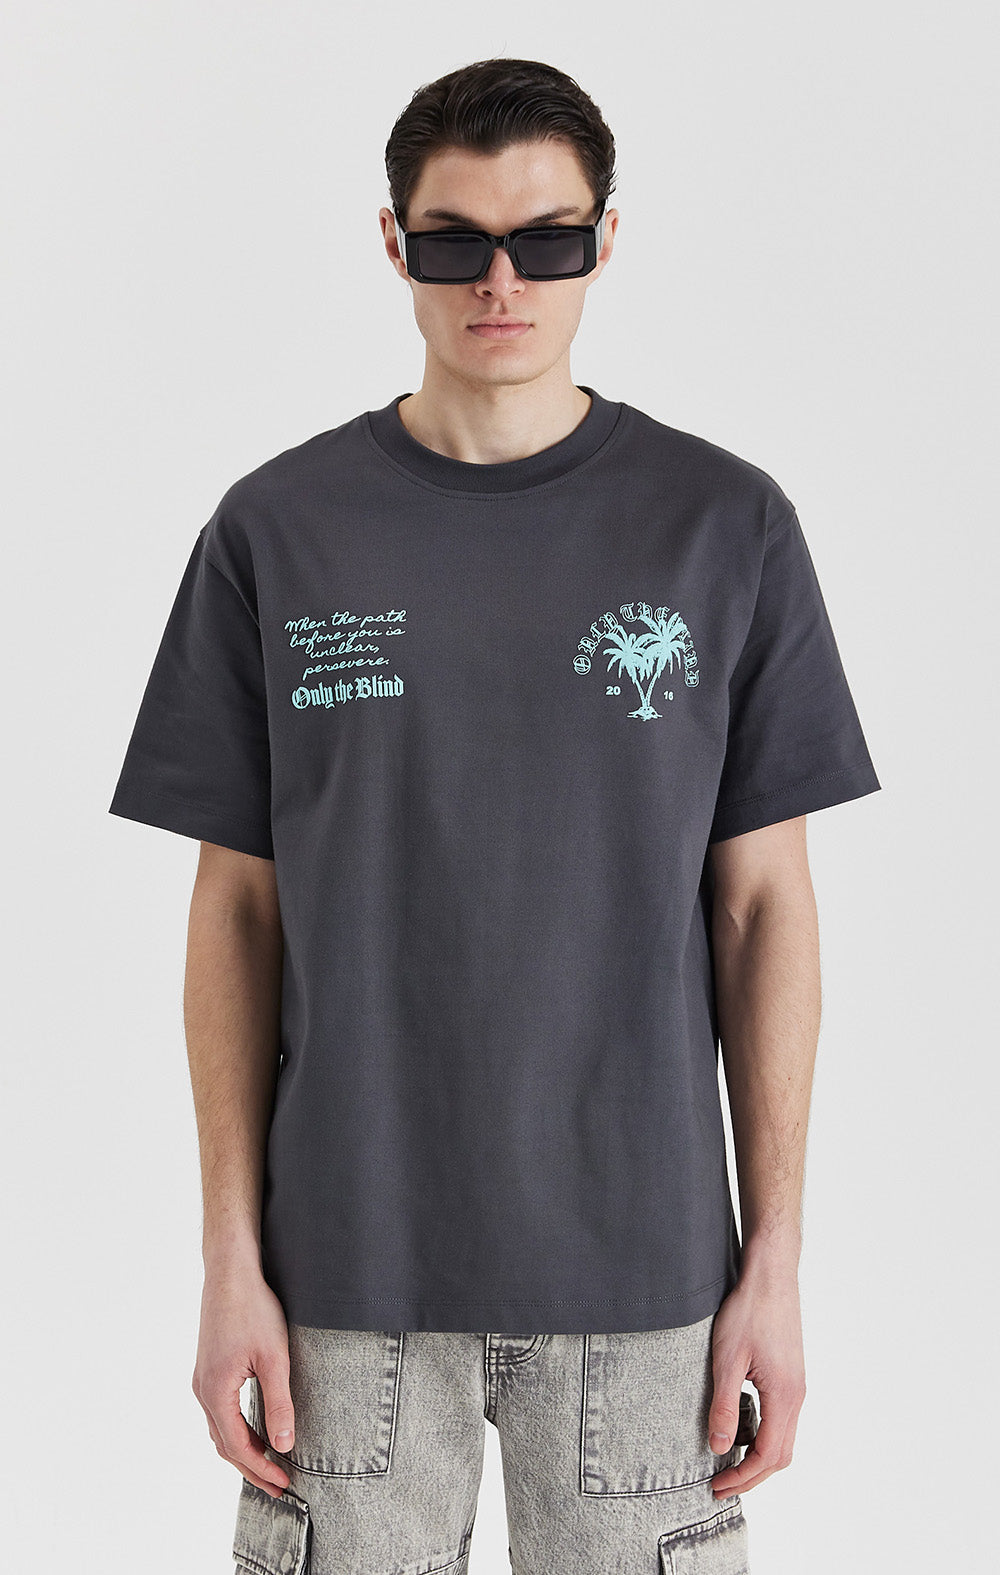 The Grand Hotel T-Shirt